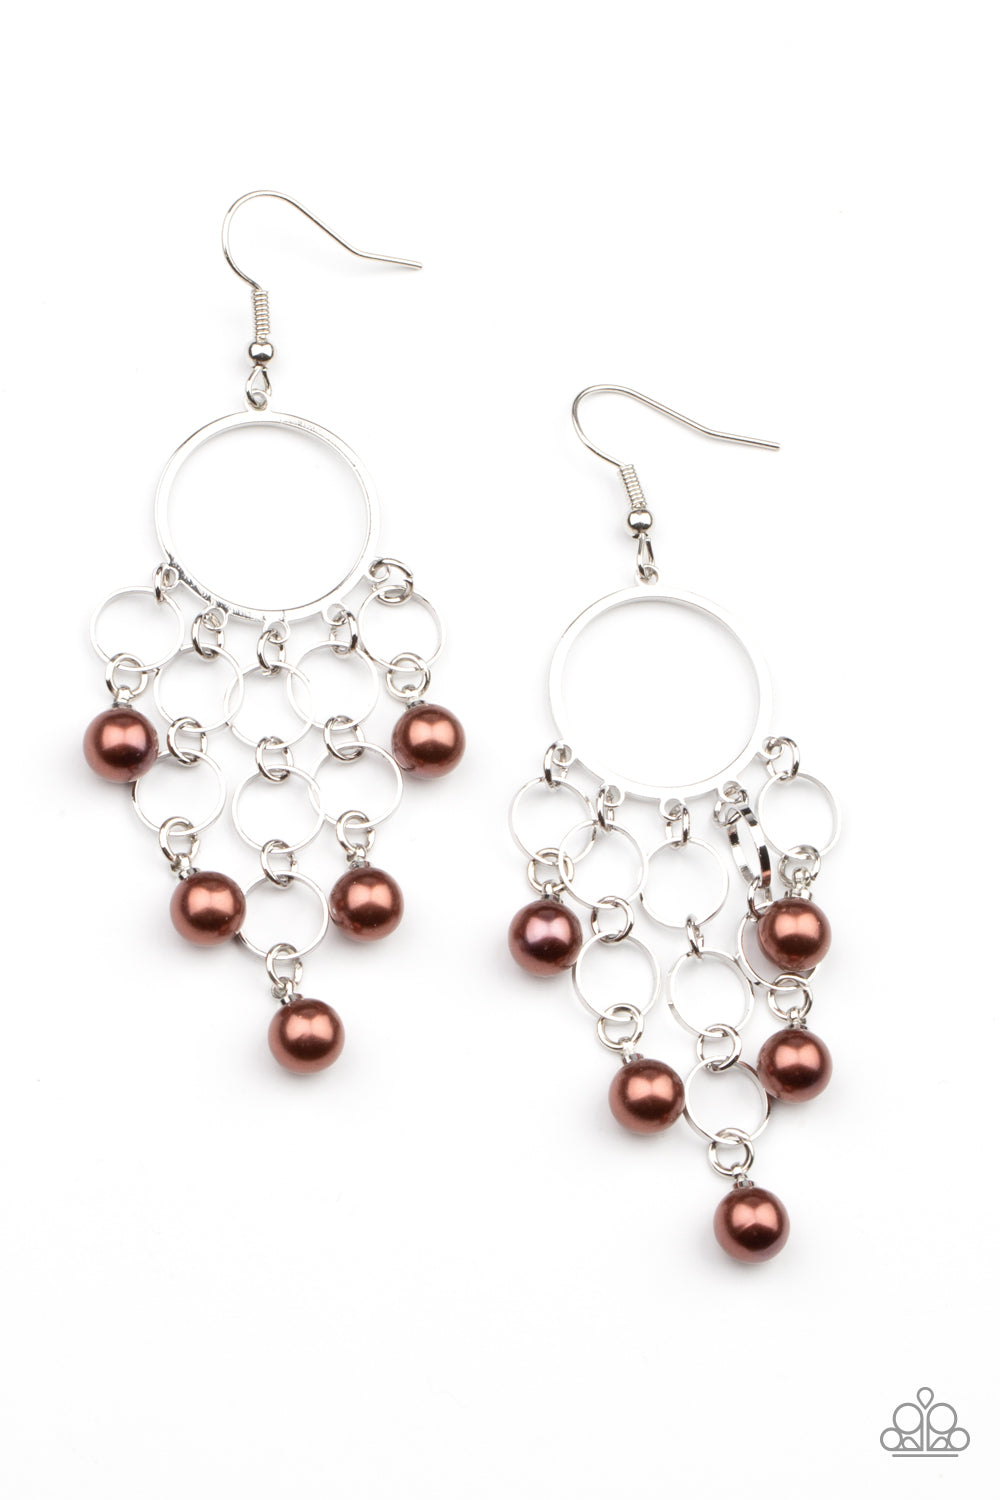 When Life Gives You Pearls - Brown Earrings